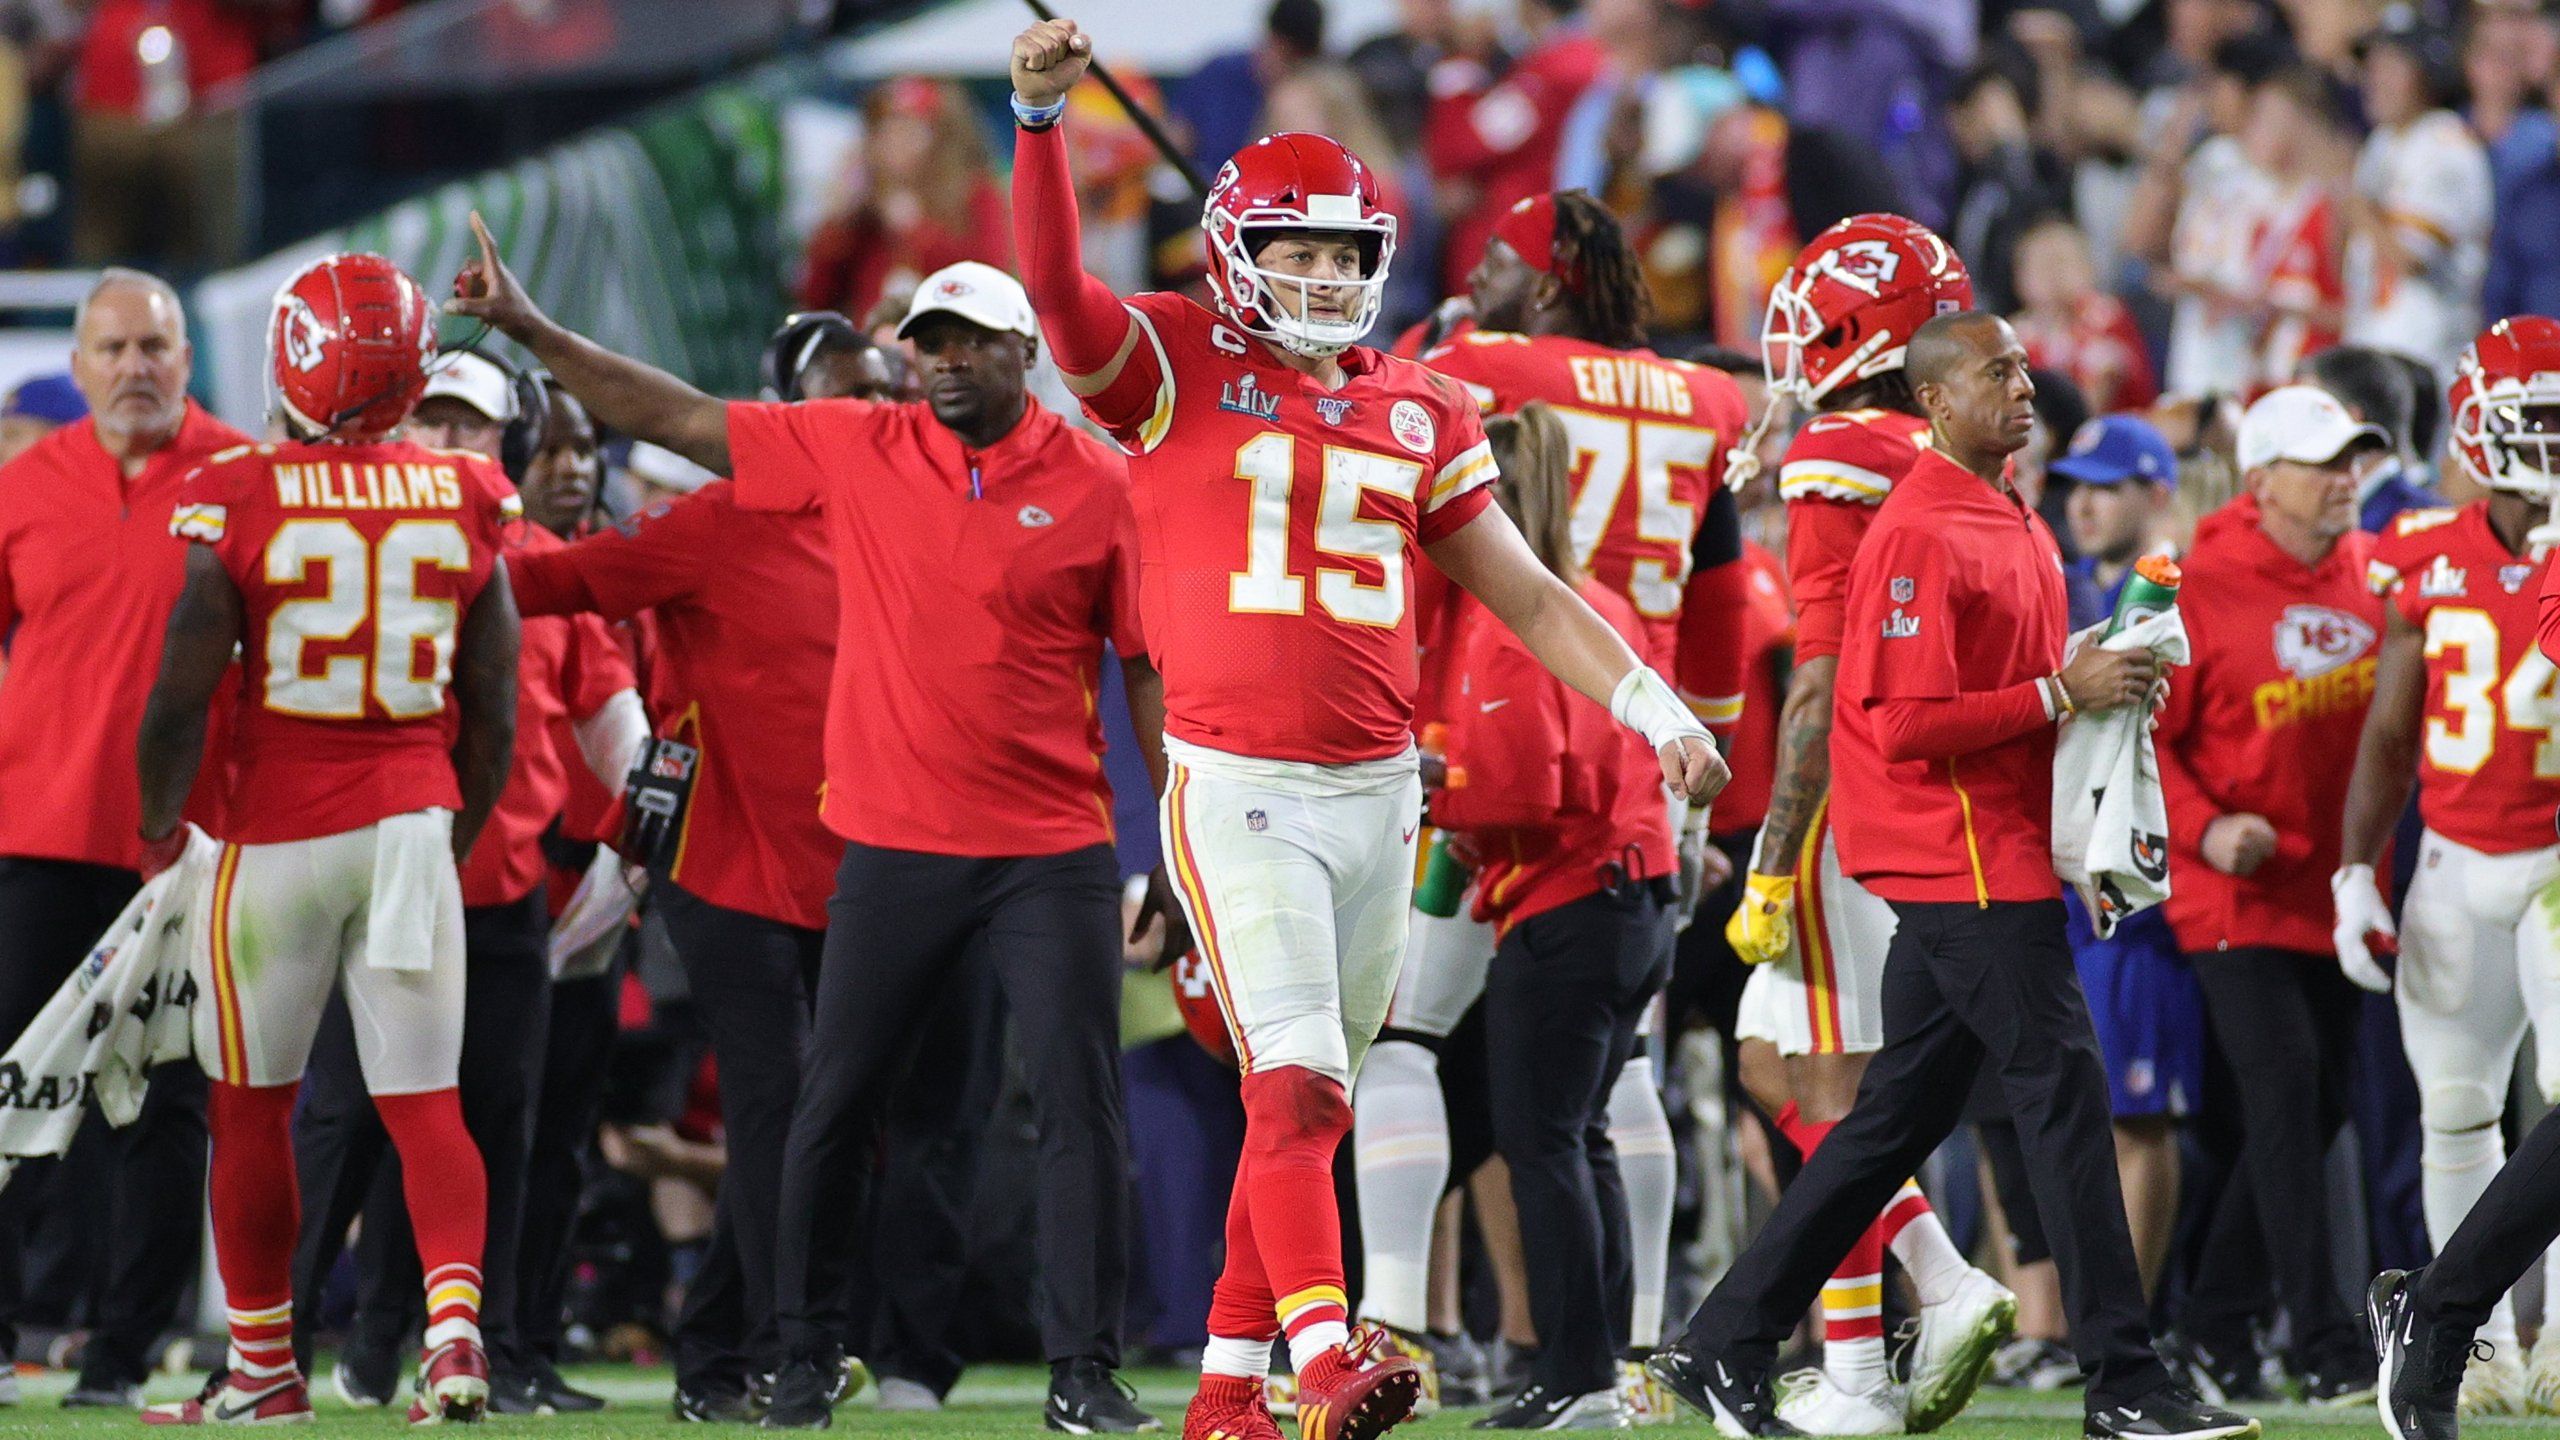 Led by Patrick Mahomes, the Kansas City Chiefs win their first